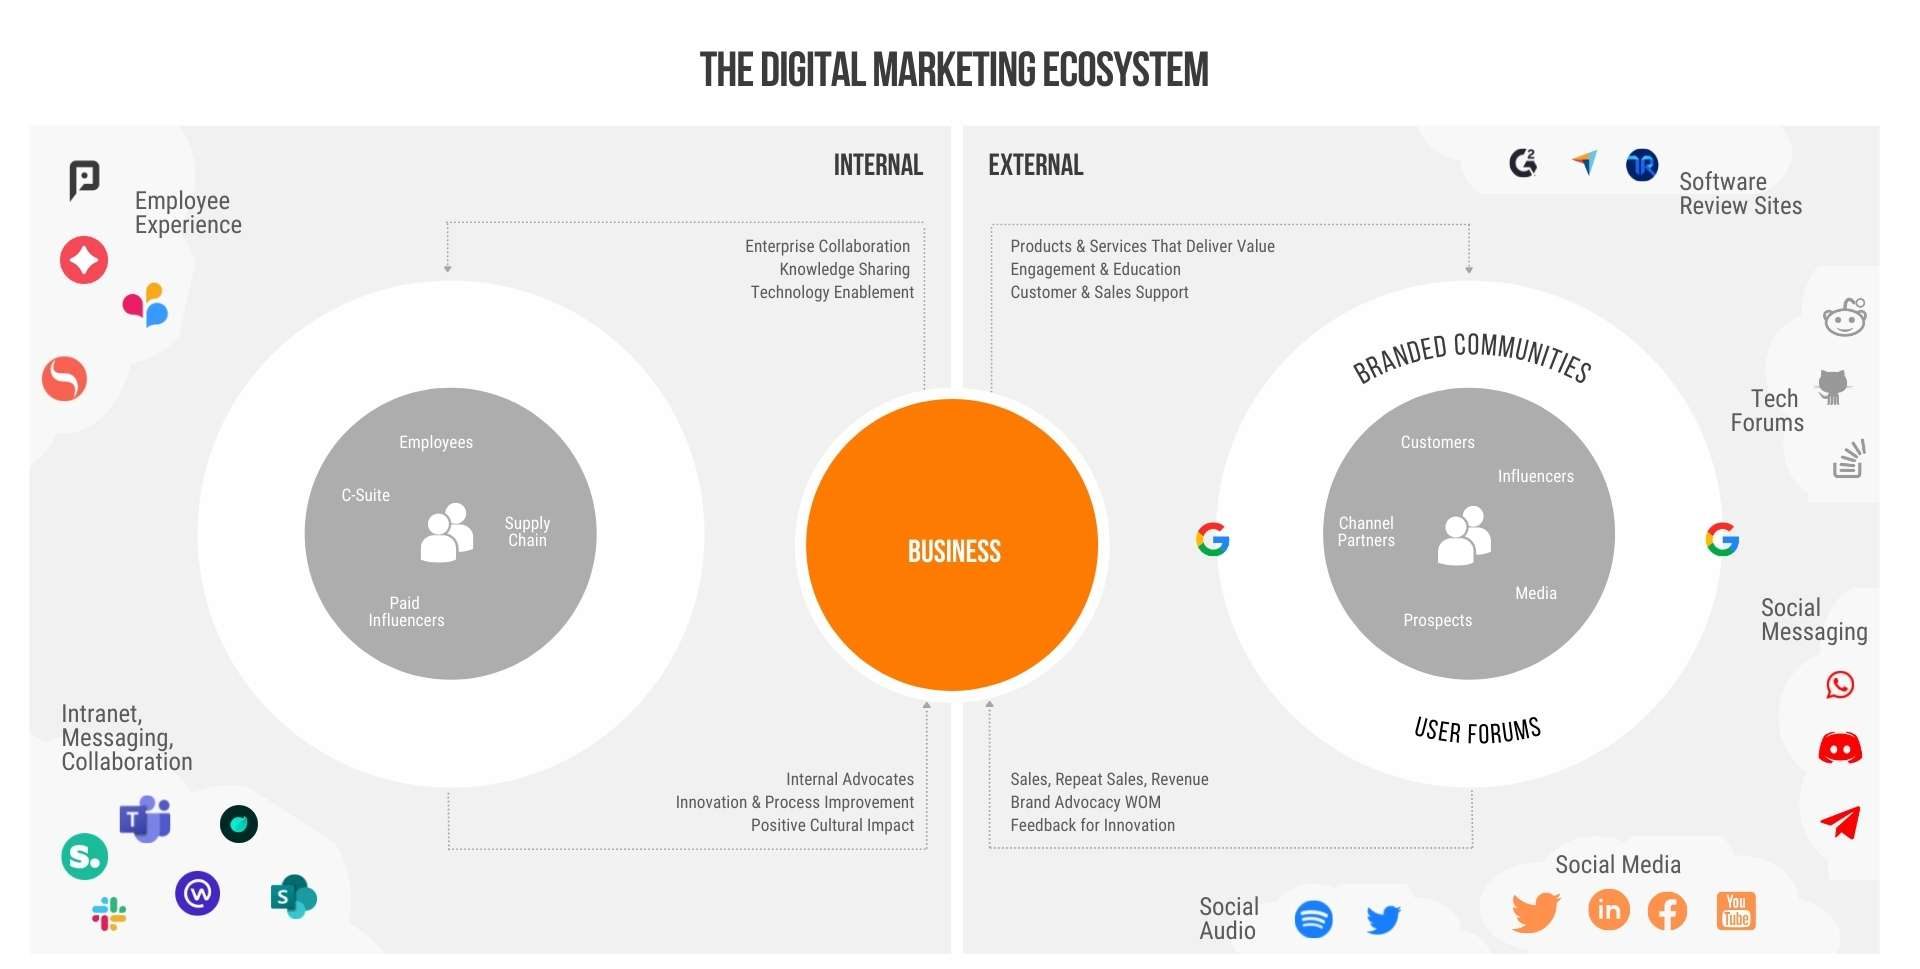 The complete digital marketing ecosystem is separated into external and internal factors. Both are important for every organization regardless of the industry.